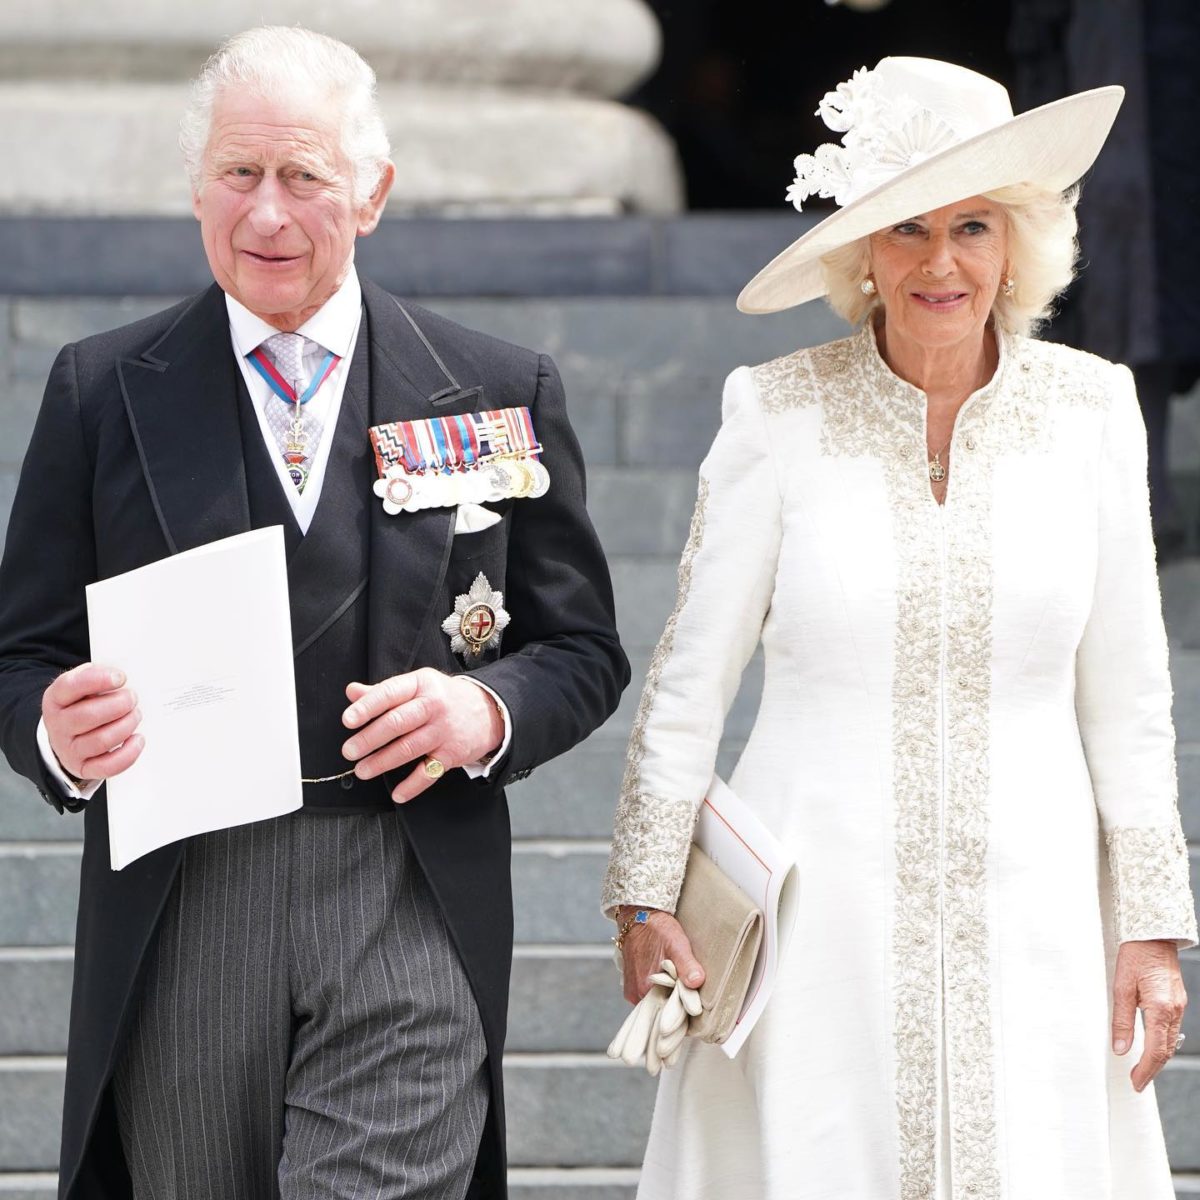 we saw a lot of the royal family during the queen's jubilee, but who are they?